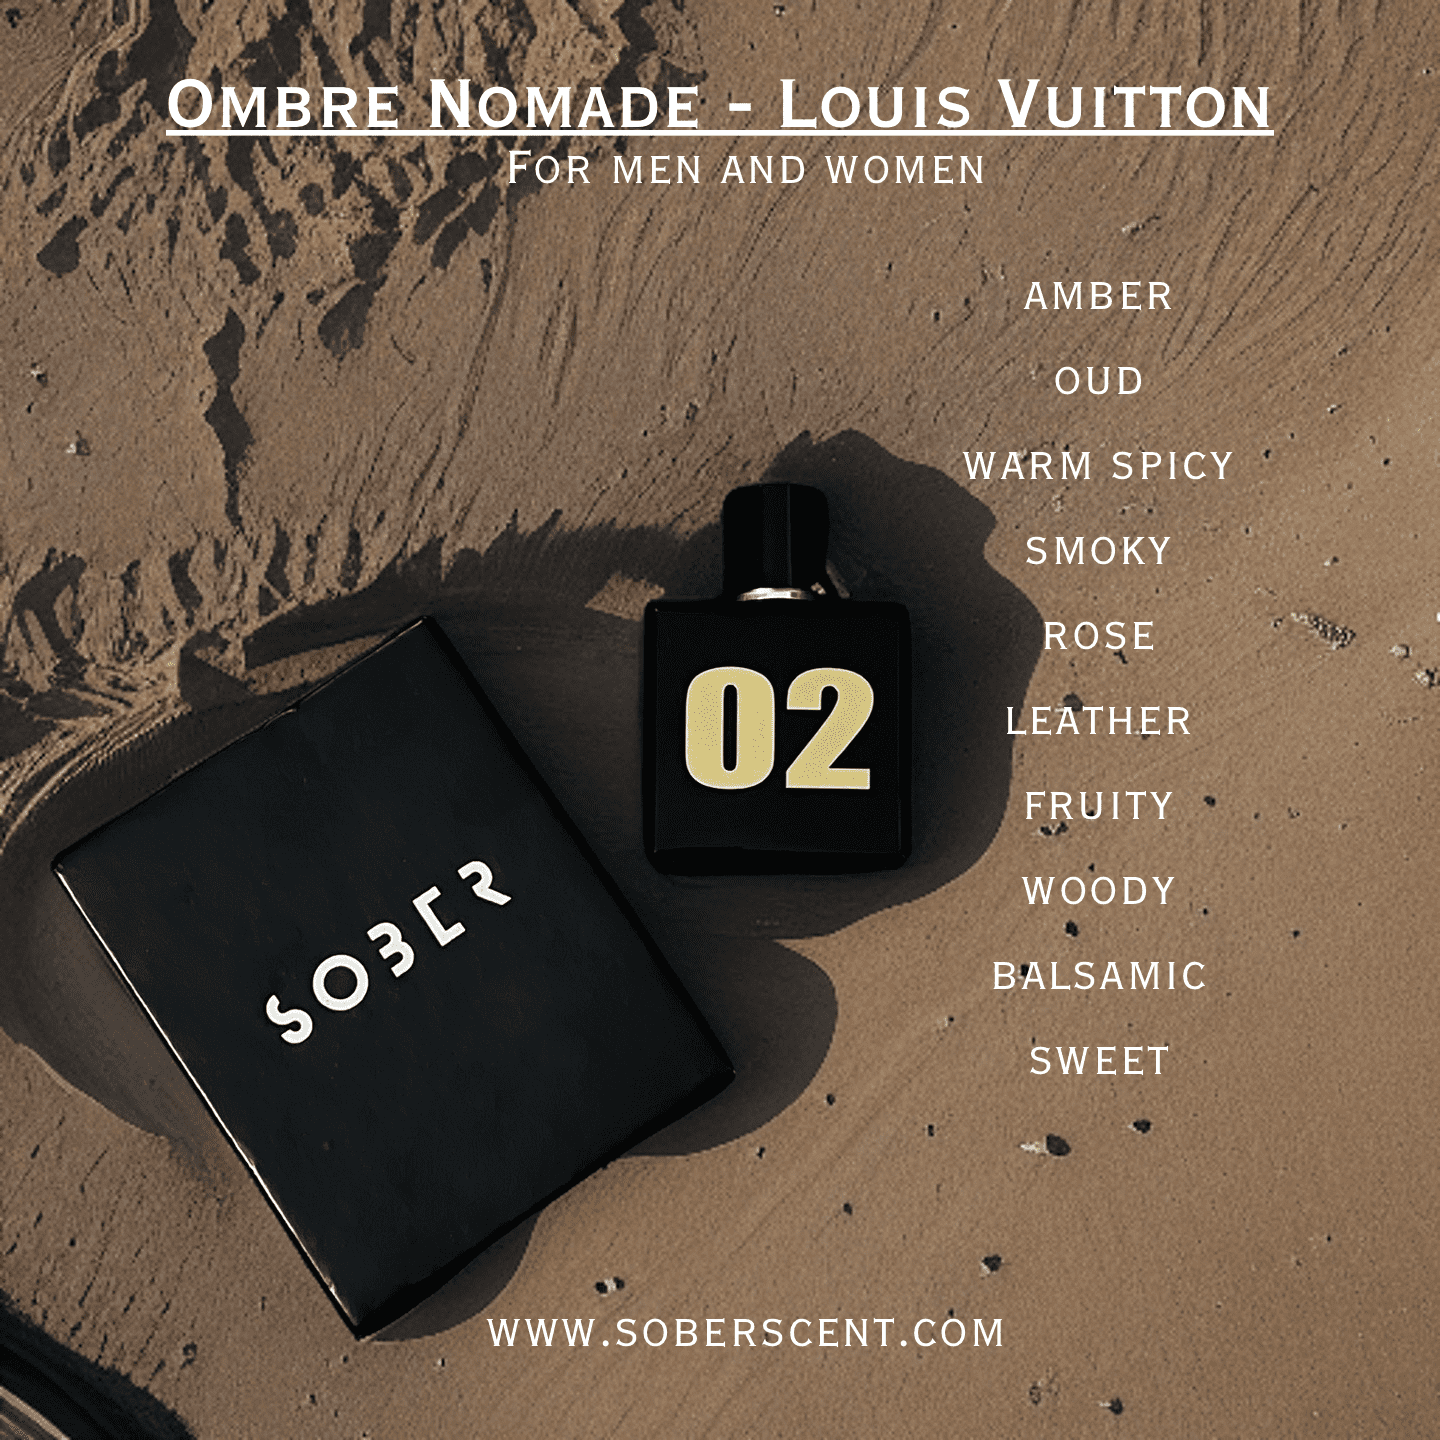 THE TRUTH ABOUT LOUIS VUITTON OMBRE NOMADE 